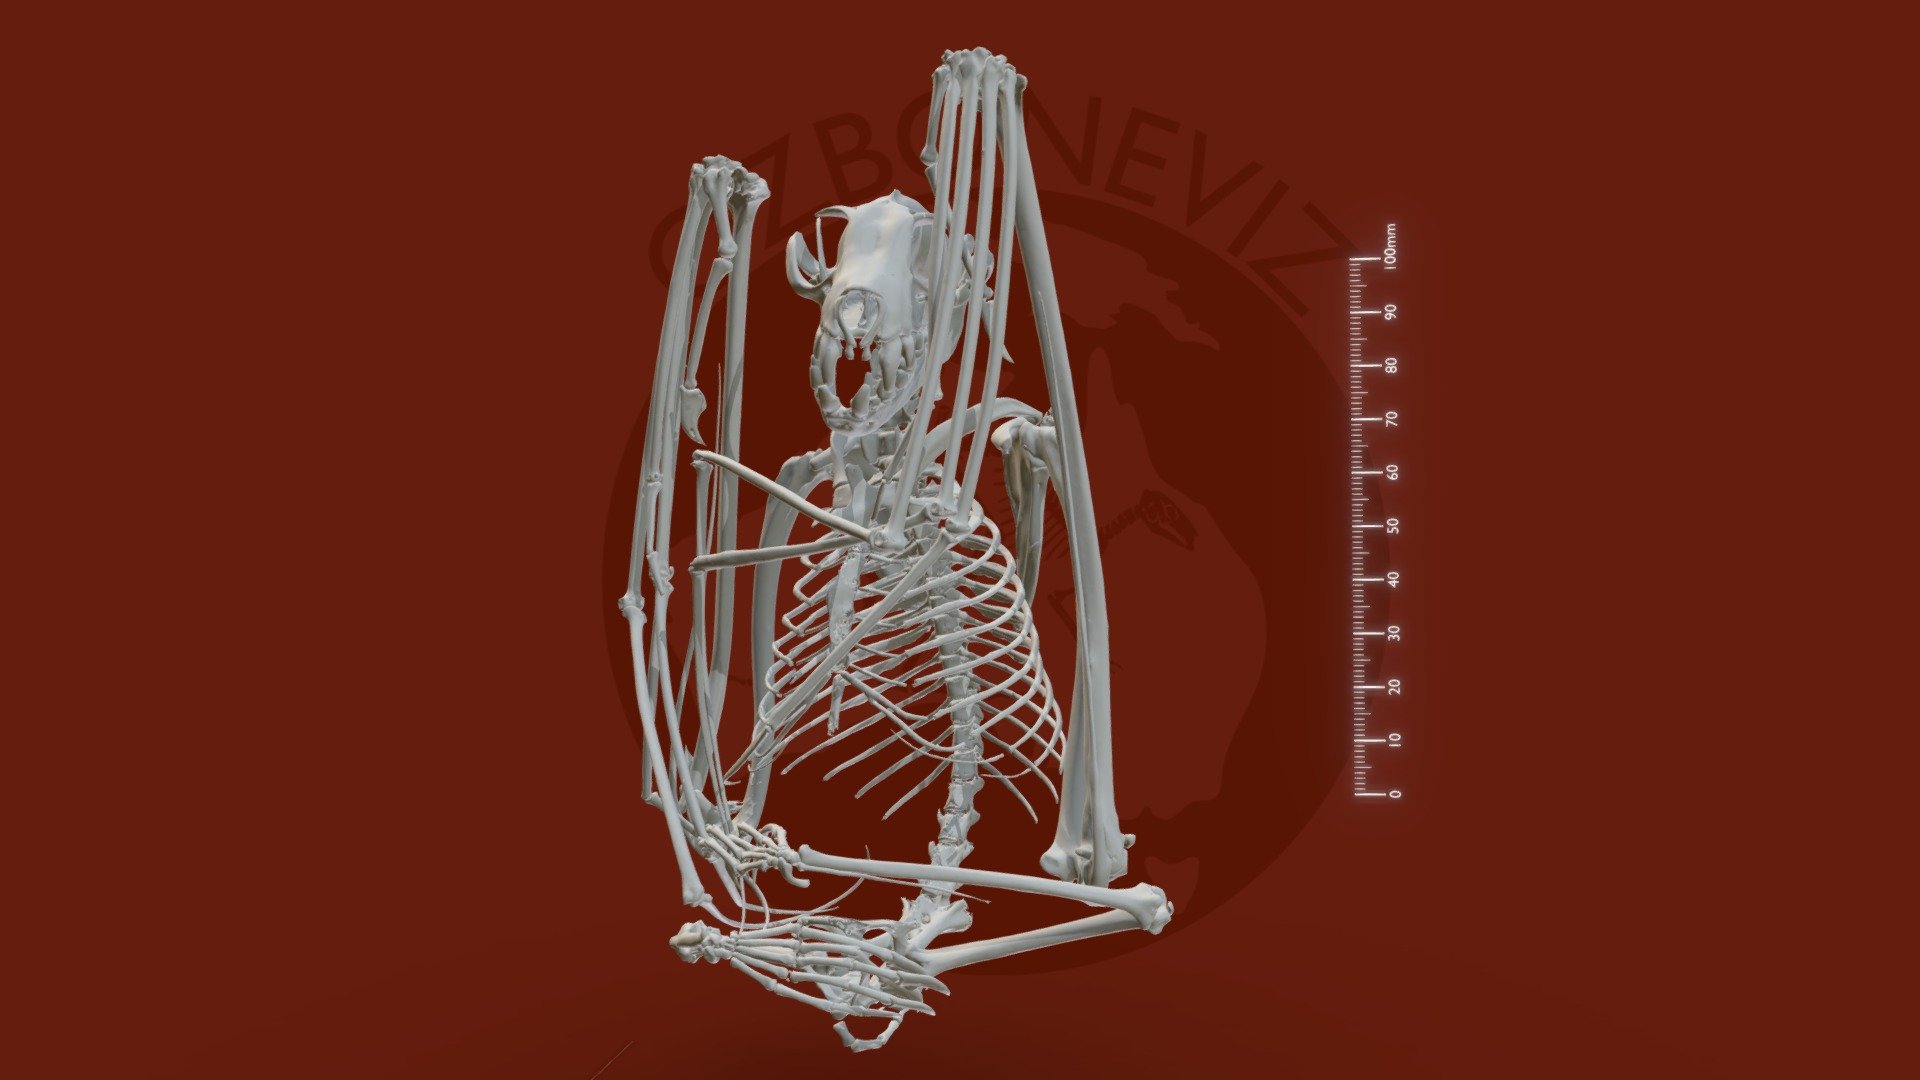 Skeleton of a New Guinea naked-backed fruit bat (Dobsonia magna) from the collection of the South Australian Museum (SAMA M10475).

3D model produced from a microCT scan using Materialise Mimics (v.24). Scanning and segmentation funded by Ozboneviz, an ARC Centre of Excellence for Australian Biodiversity and Heritage project. Further editing in Blender.

Original data available on MorphoSource https://www.morphosource.org/concern/media/000535864 - New Guinea naked-backed fruit bat skeleton - 3D model by Ozboneviz 3d model